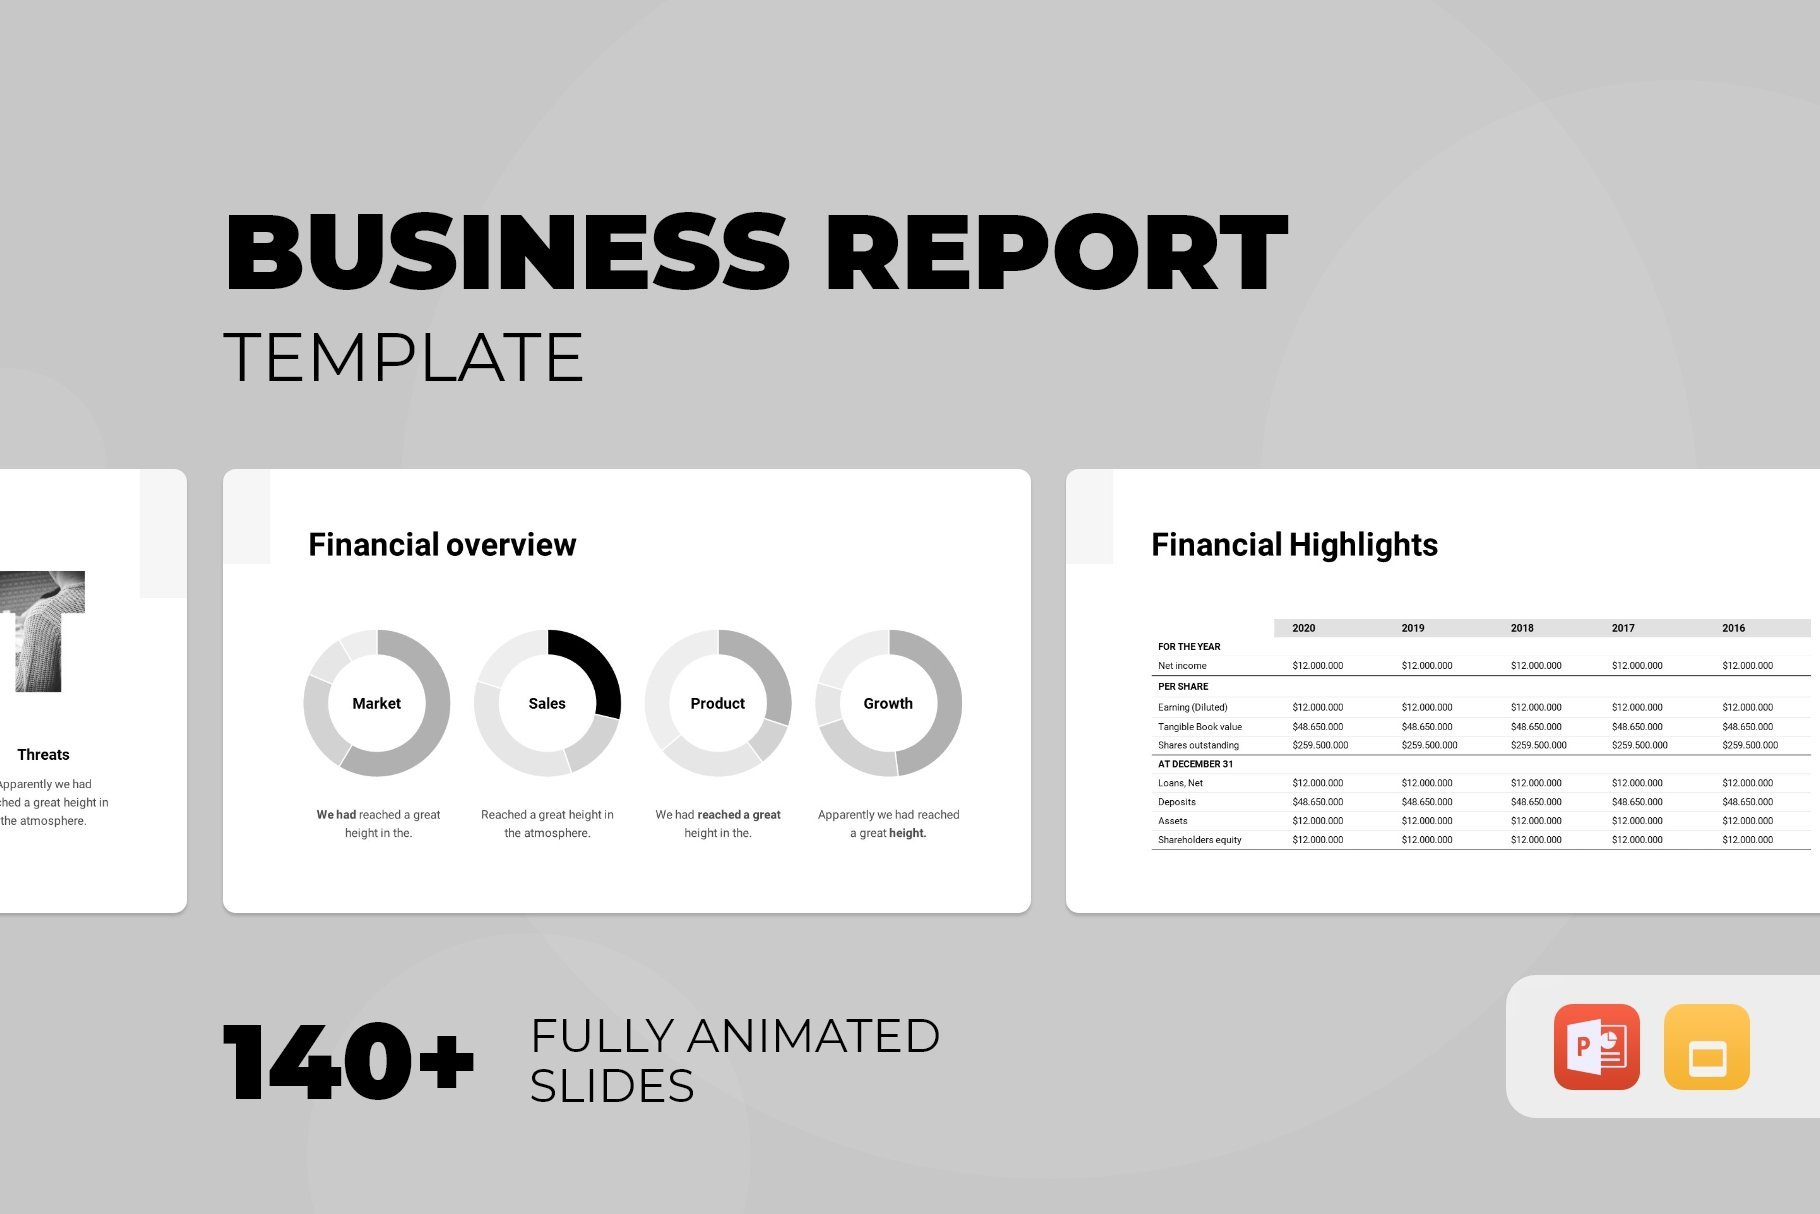 View of business report template.